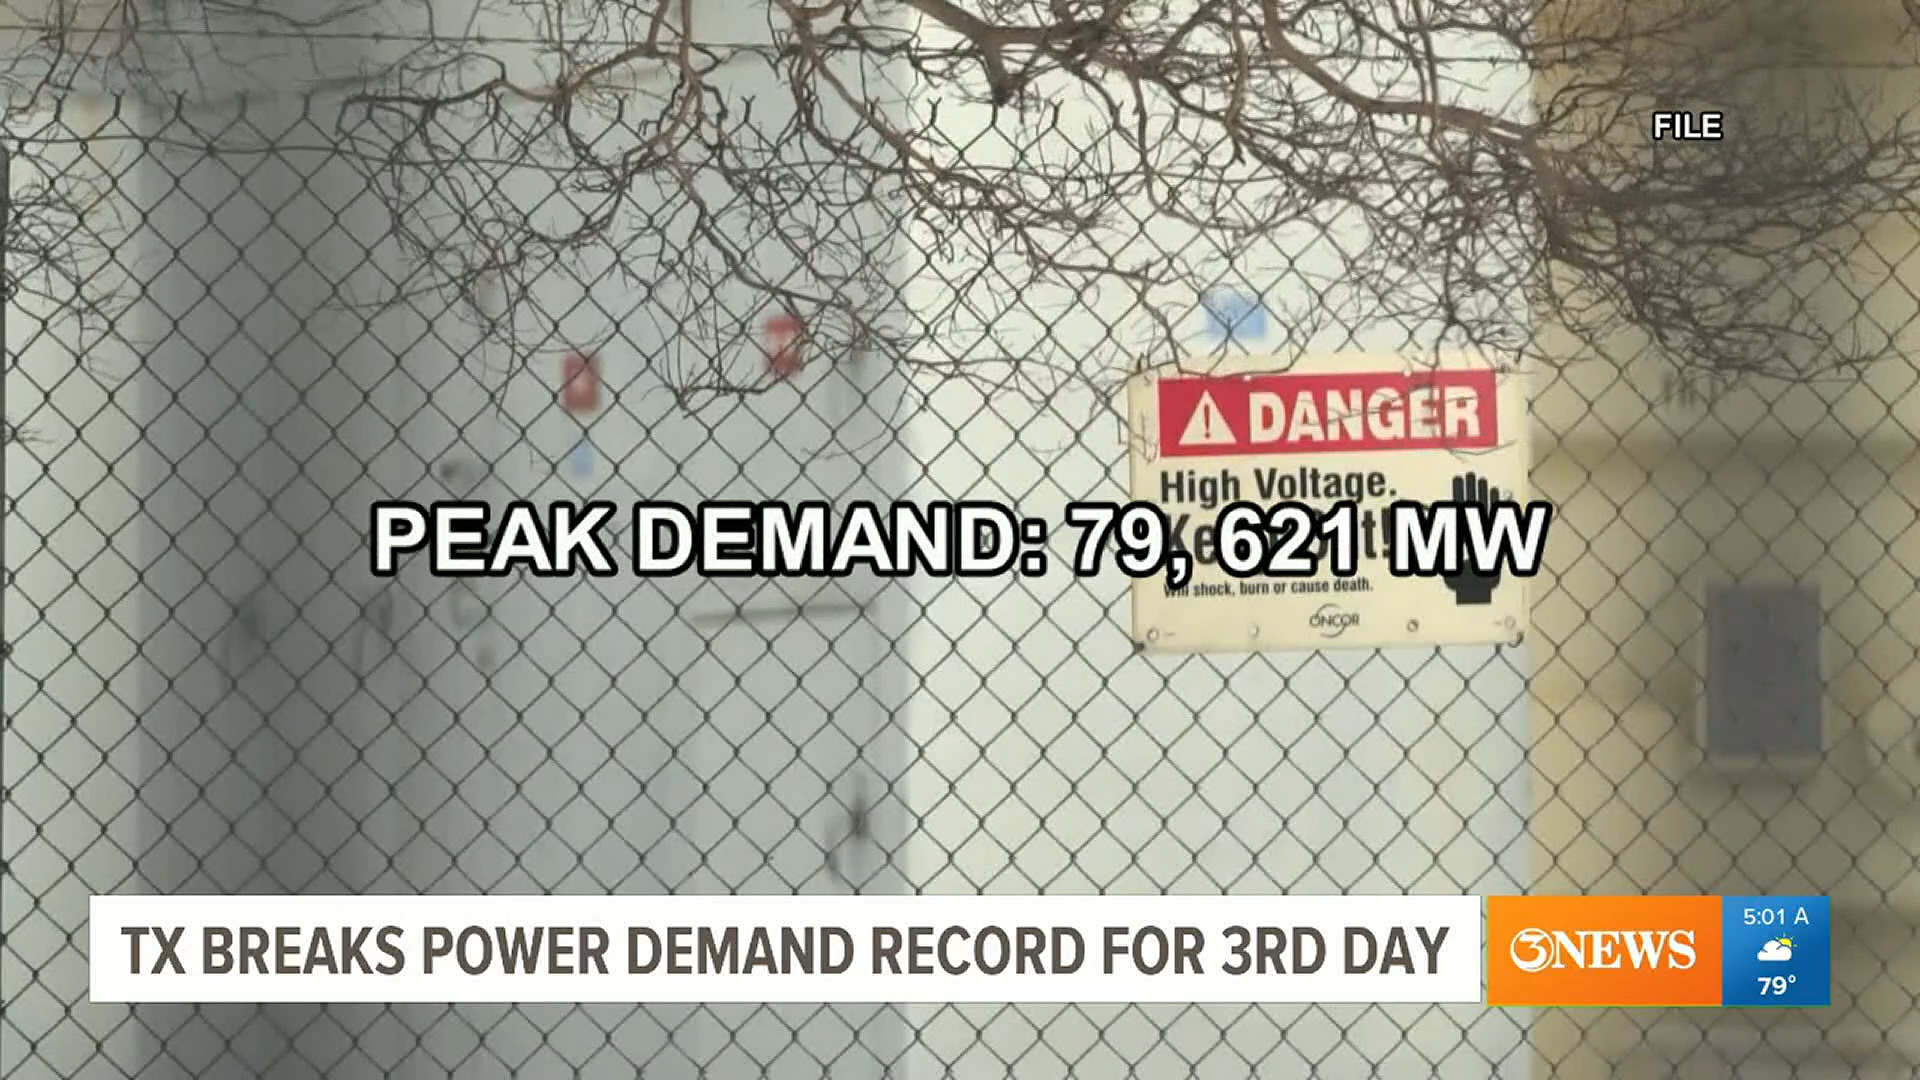 Texas power grid operator ERCOT reported that the peak power demand in Texas on 21 July 2022 was 79,621 MW, the third day in a row that the Texas power grid broke a record for power demand, as people used air conditioners to escape the brutal heat wave blanketing most of the U.S. Photo: KIII TV